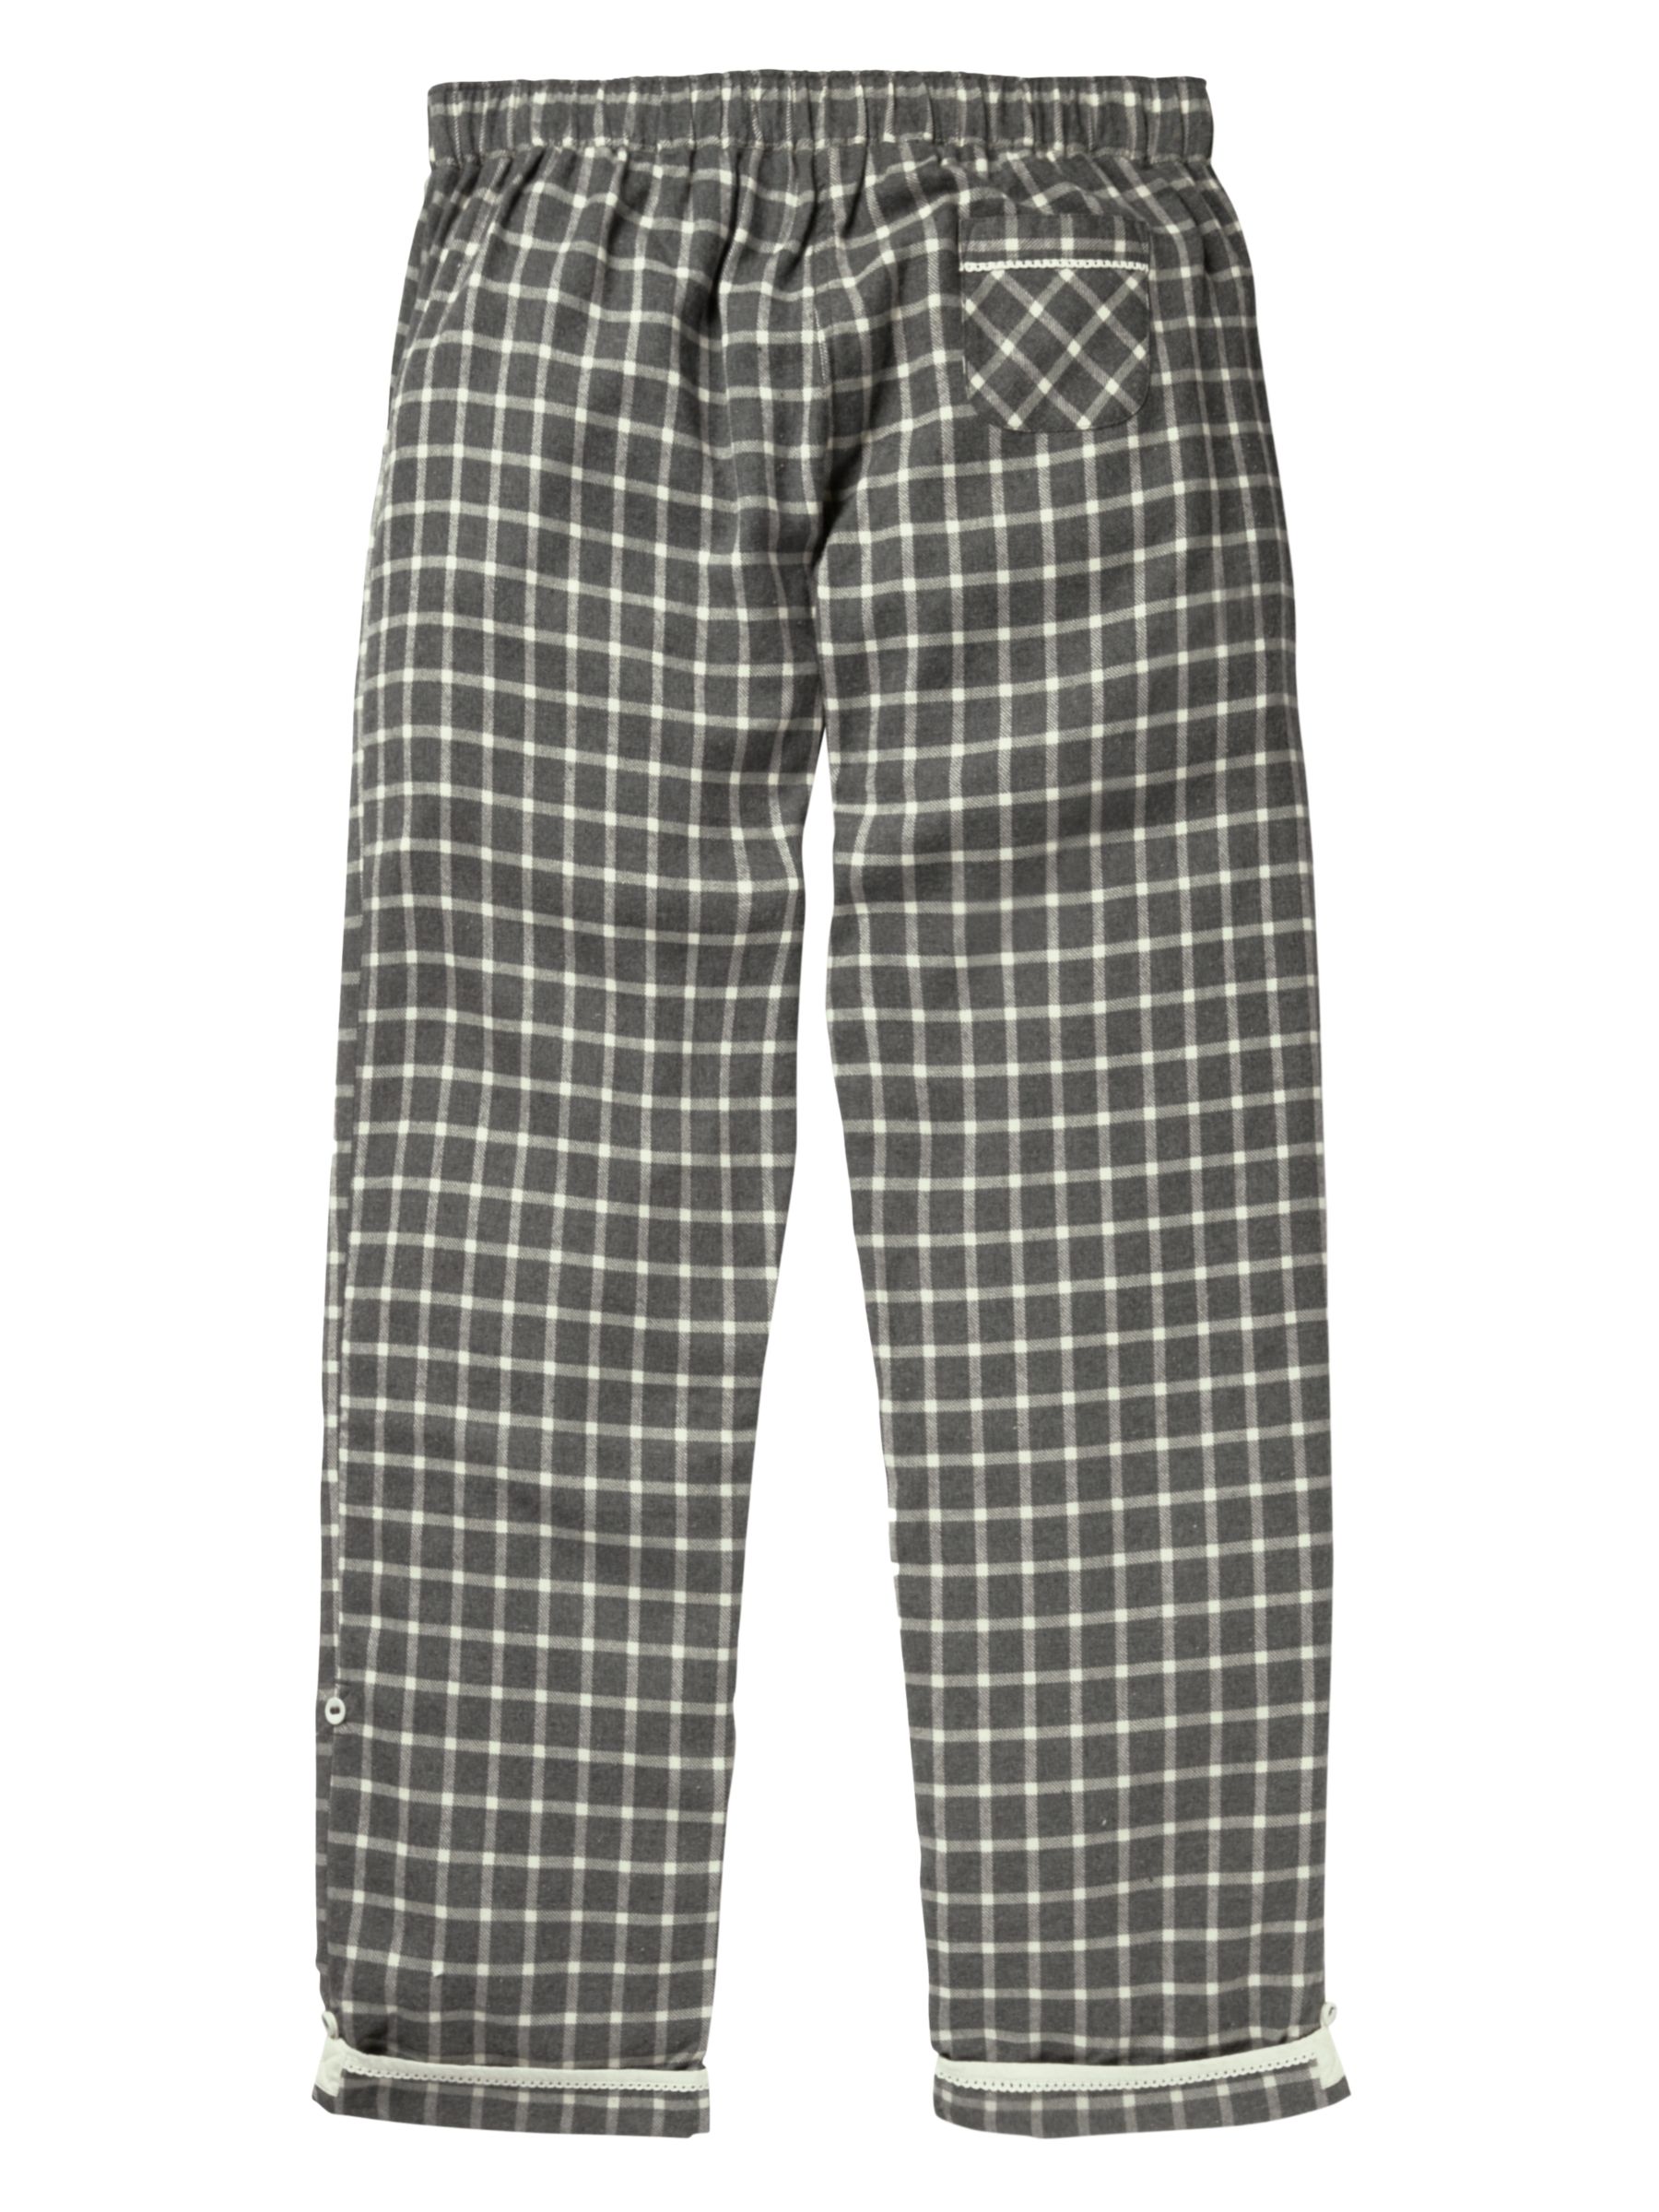 Fat Face Grid Check Pyjama Bottoms, Charcoal